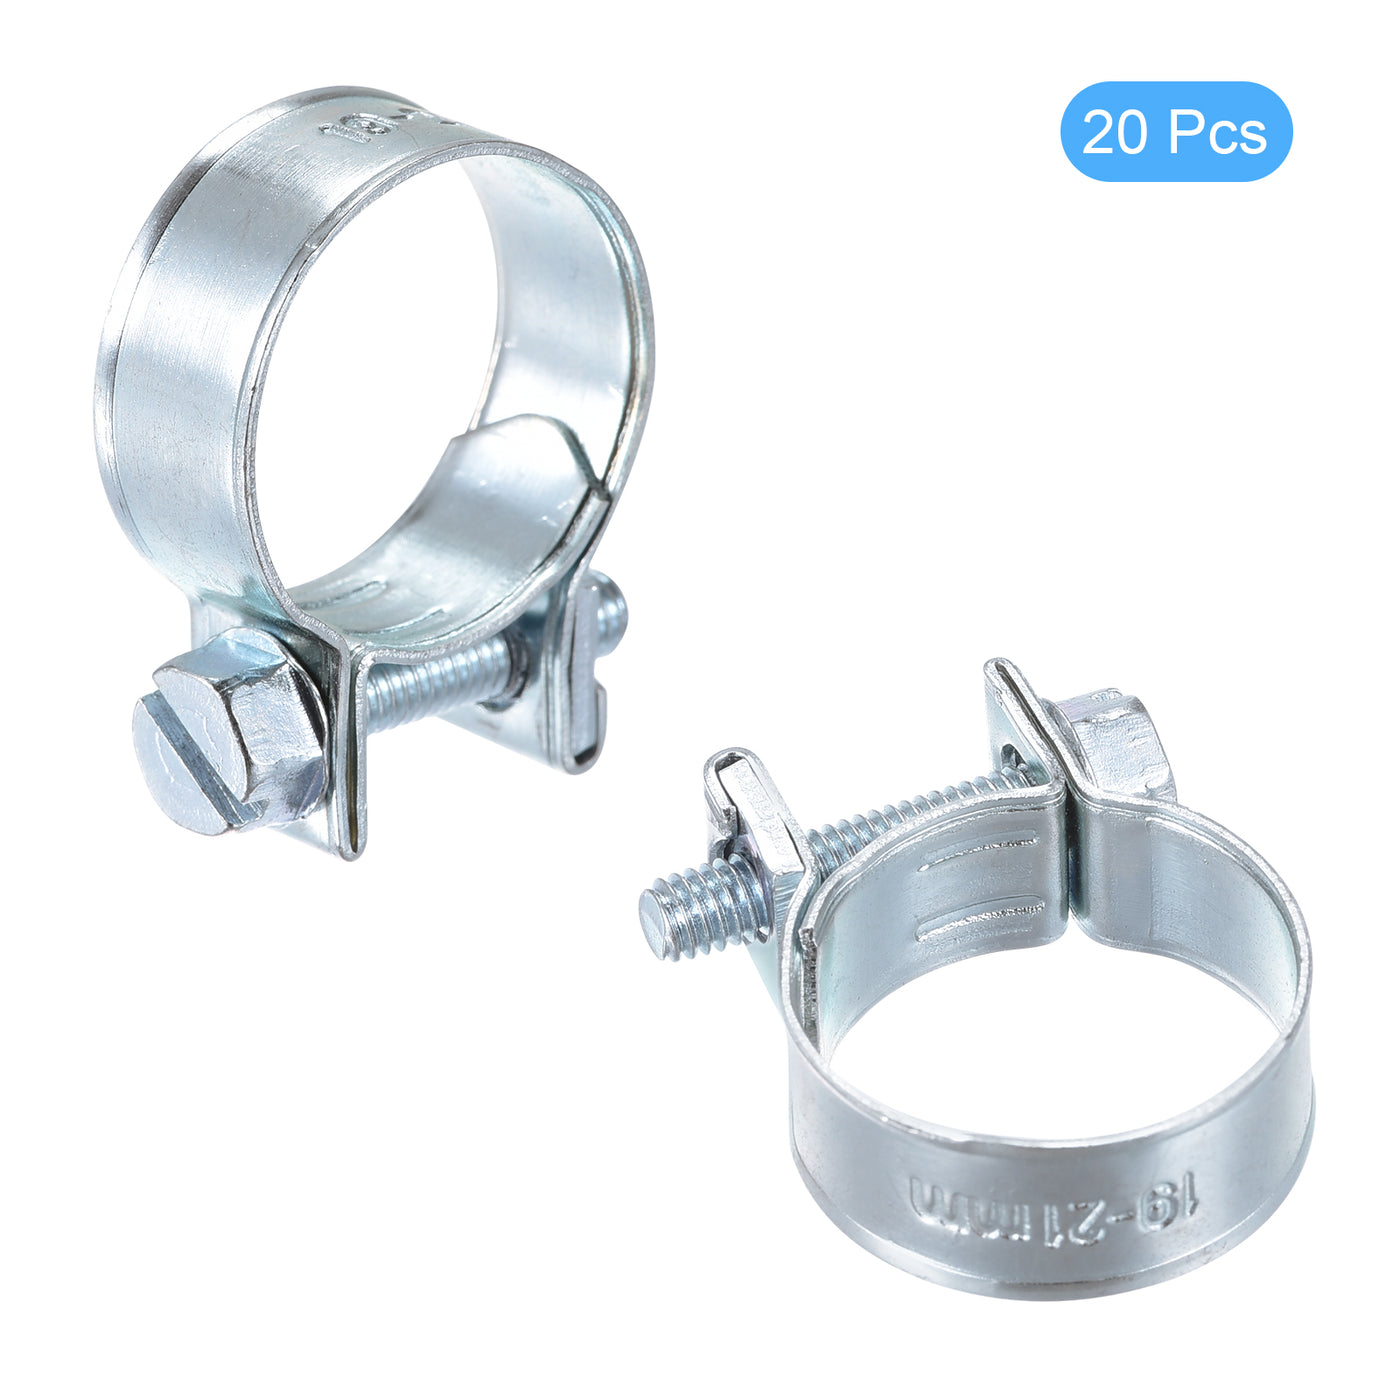 Uxcell Uxcell 19-21mm Mini Fuel Injection Hose Clamp Zinc Plated Steel Fuel Line Clamp 20pcs